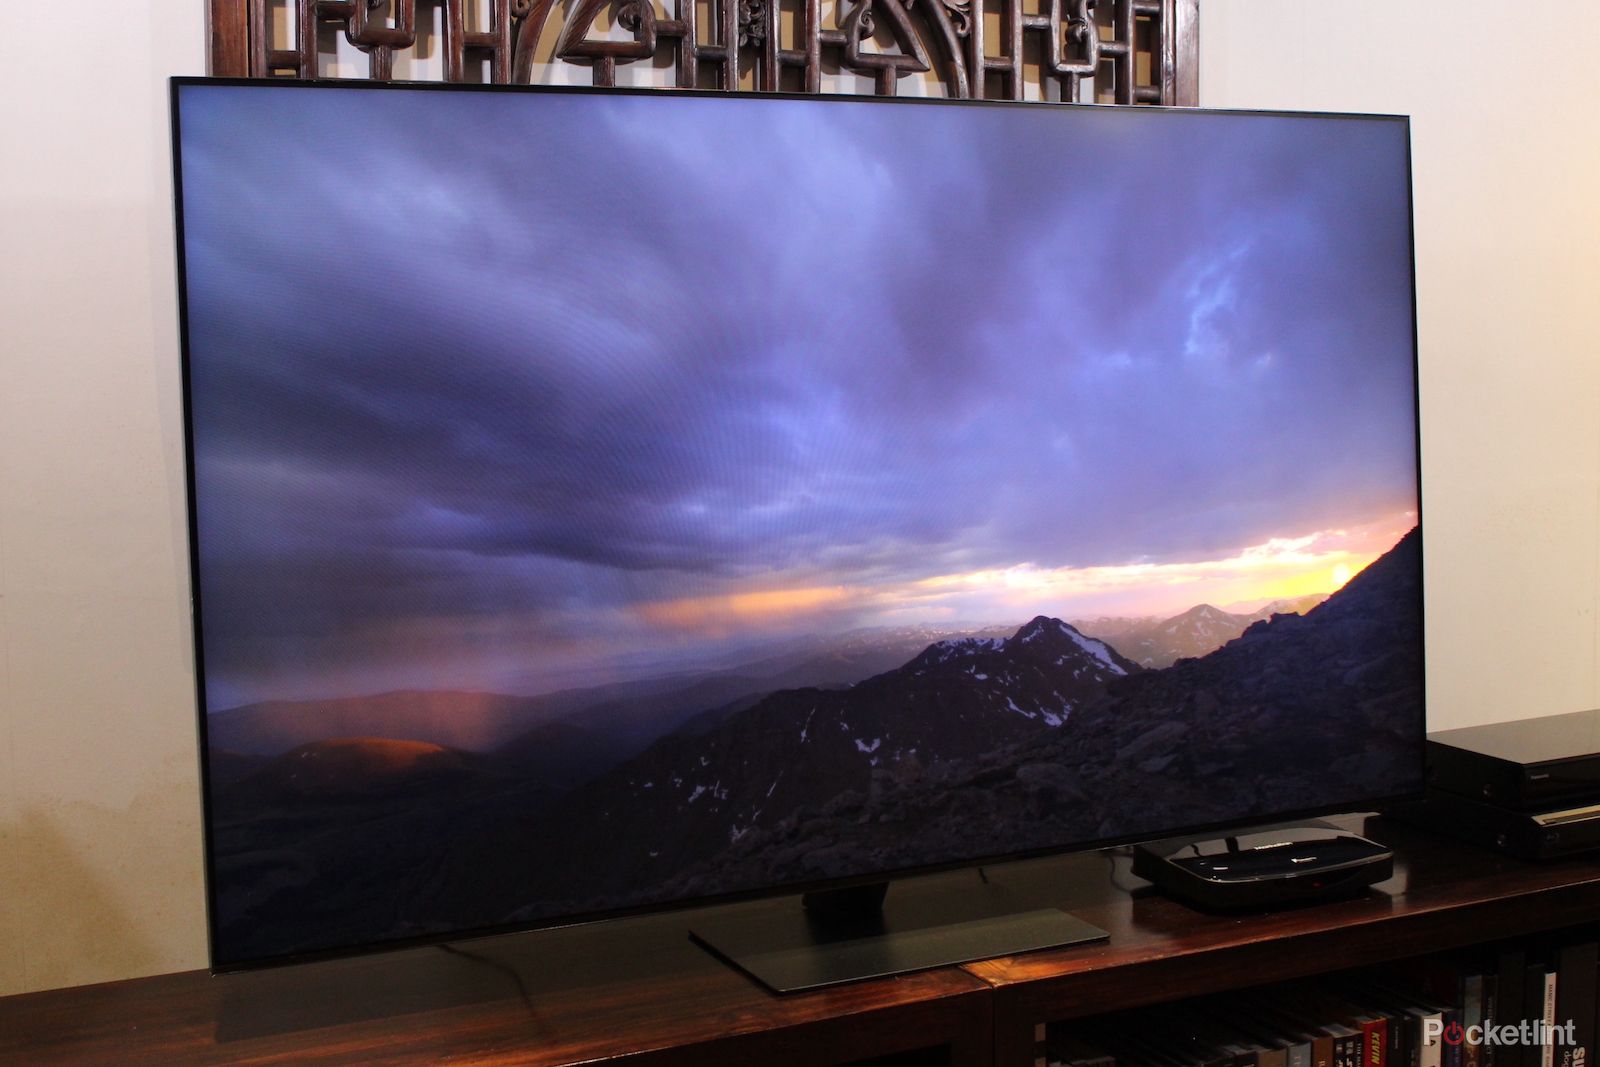 Samsung 65-Inch QN95C Neo QLED TV Review